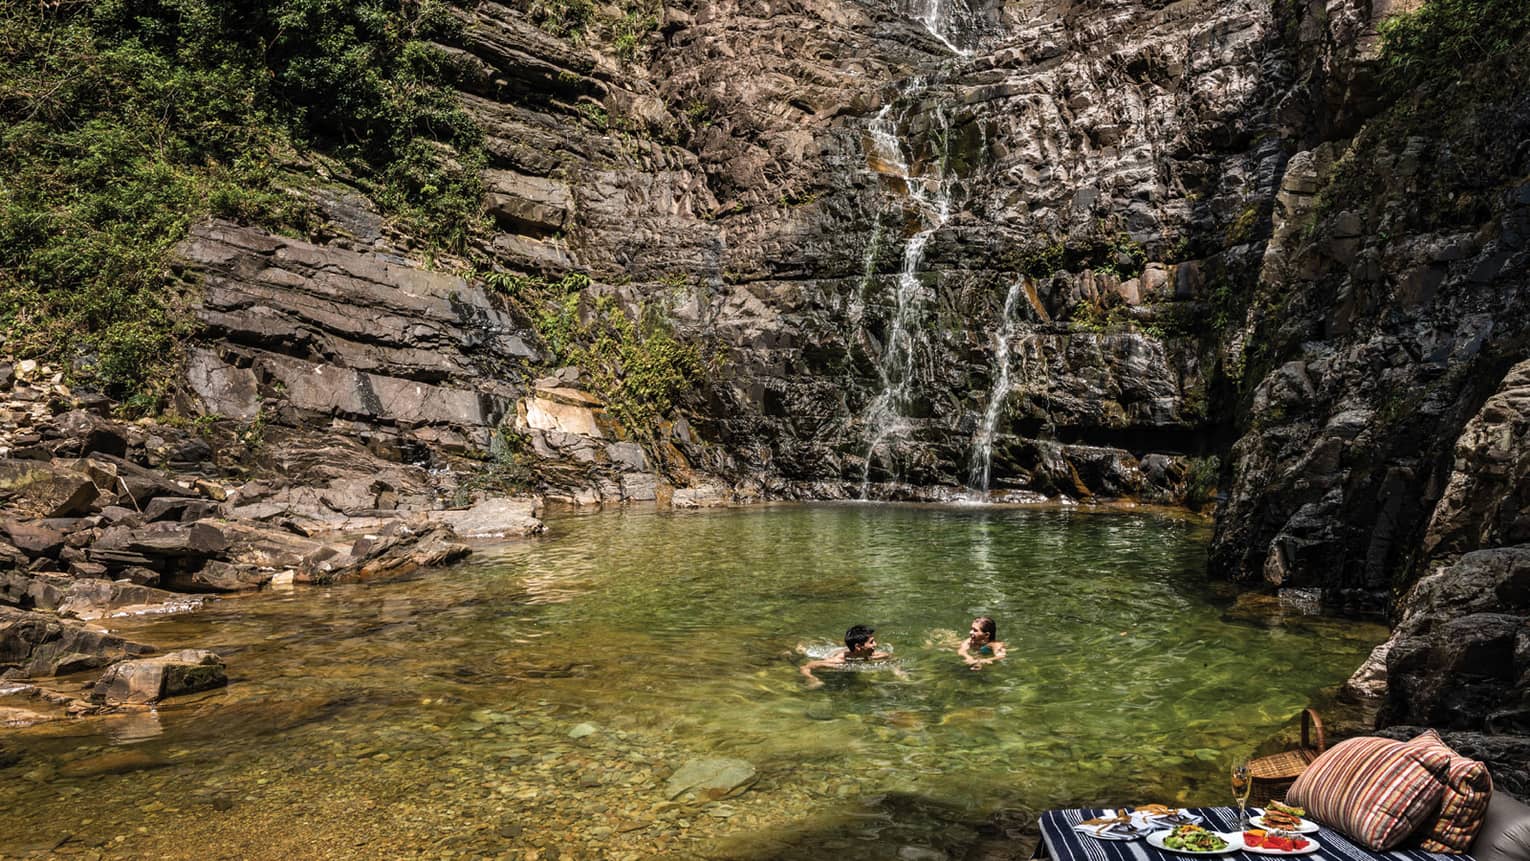 Couple swims in pool at base of waterfall, picnic lunch on rocks